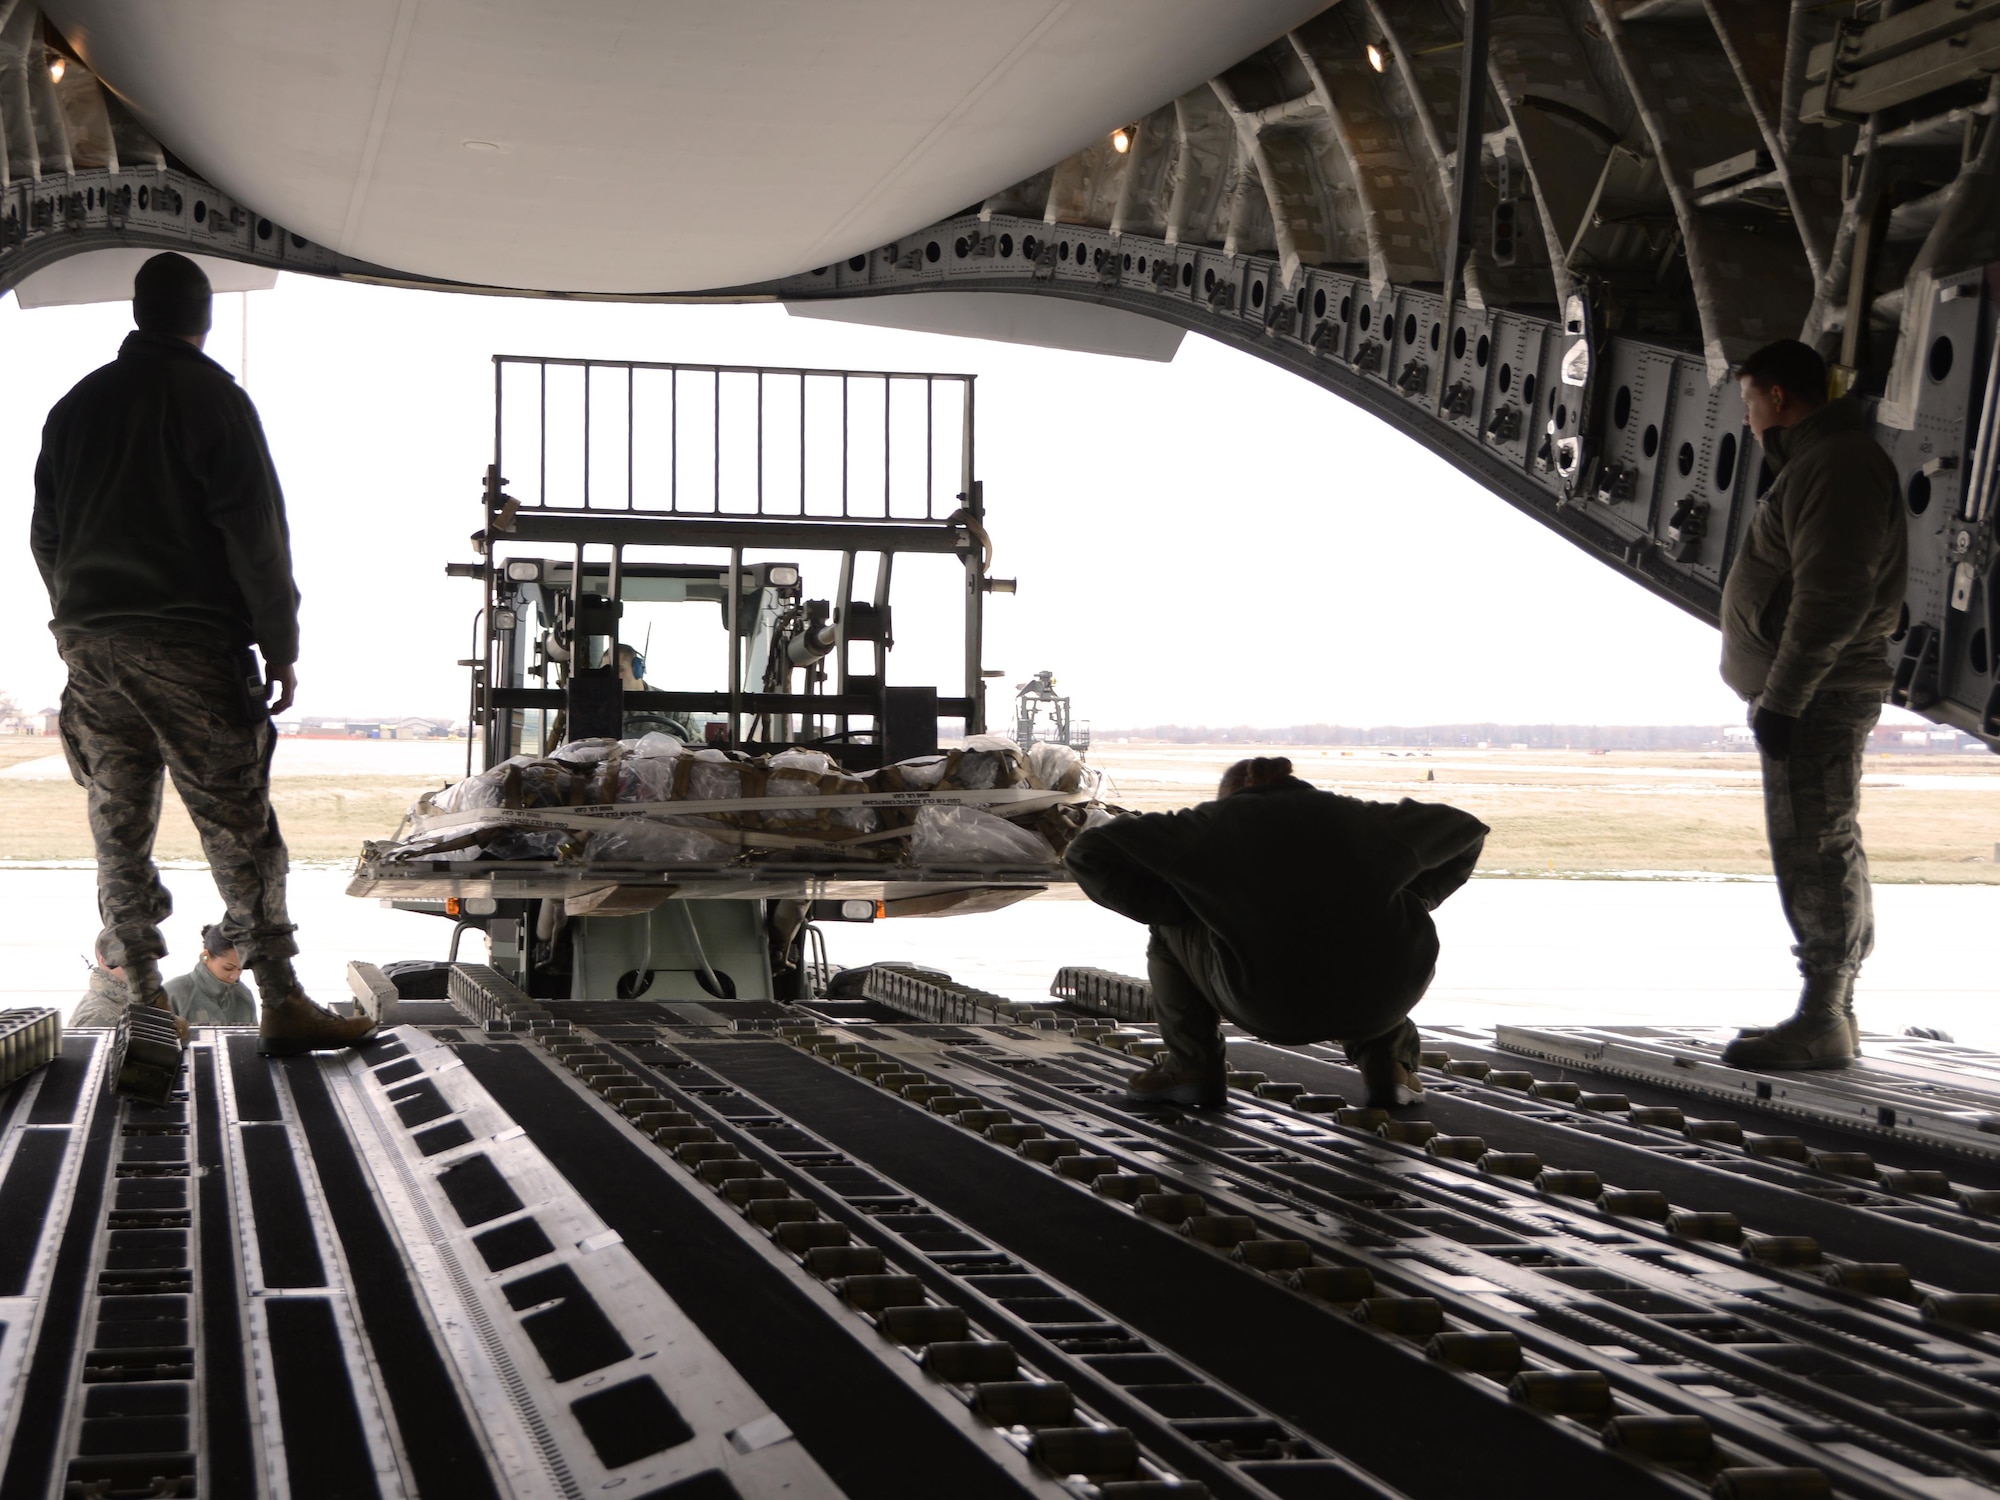 Members of the 30th Aerial Port Squadron and the 317th Airlift Squadron from Charleston, S.C. load a pallet onto a C-17 Globemaster III from Charleston, S.C., at Niagara Falls Air Reserve Station, January 9, 2016. The pallet is being transported to Dobbins Air Reserve Base, Ga. (Photo by U.S. Air Force Staff Sgt. Richard Mekkri/released)